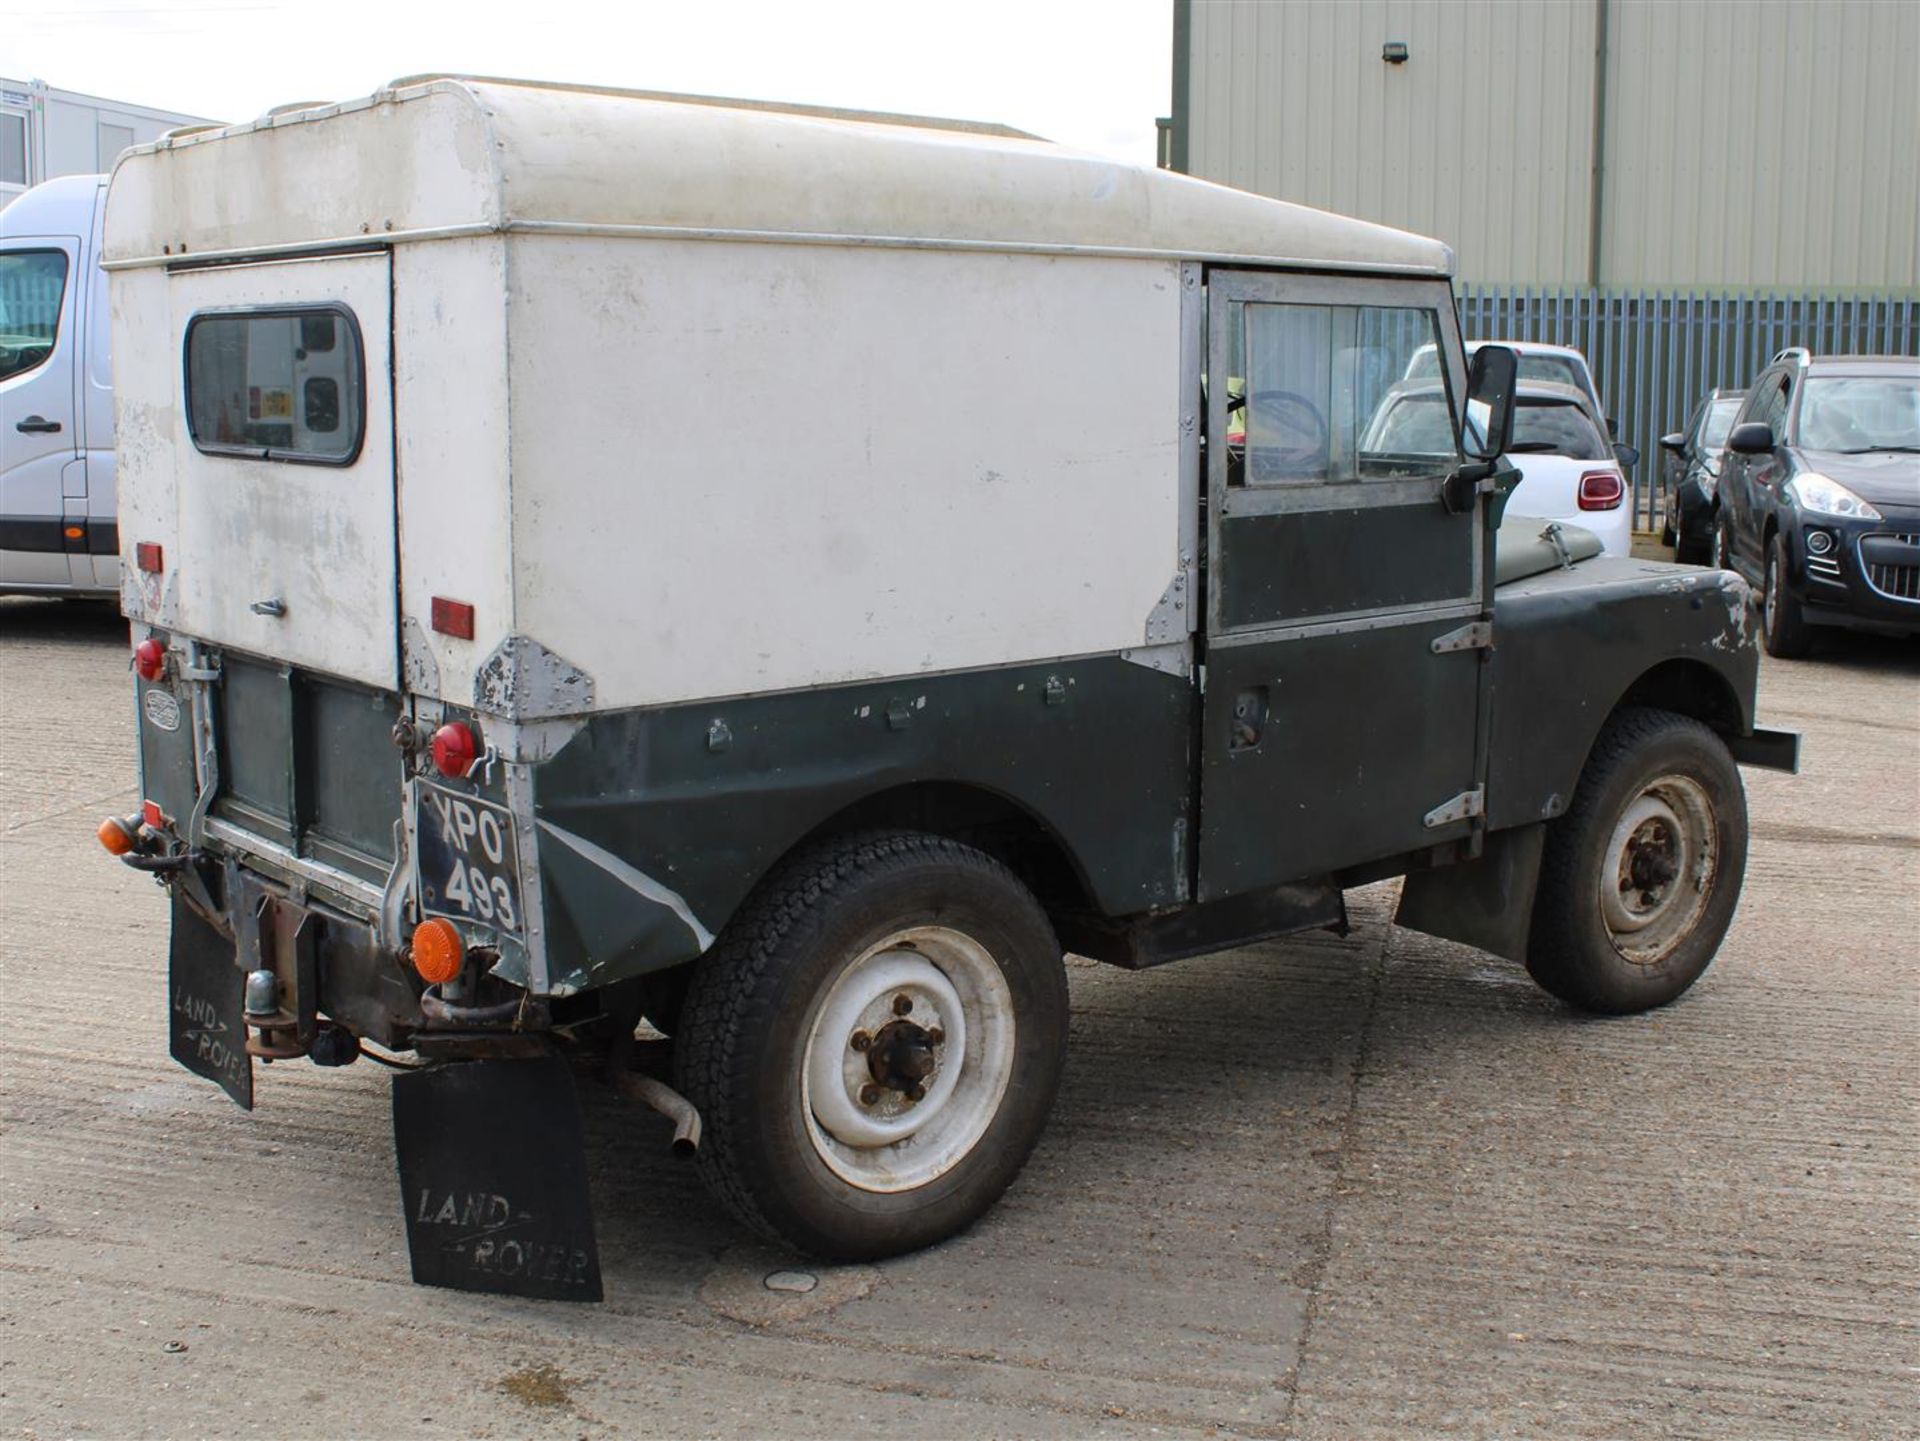 1957 Land Rover 88 Series I" - Image 6 of 26